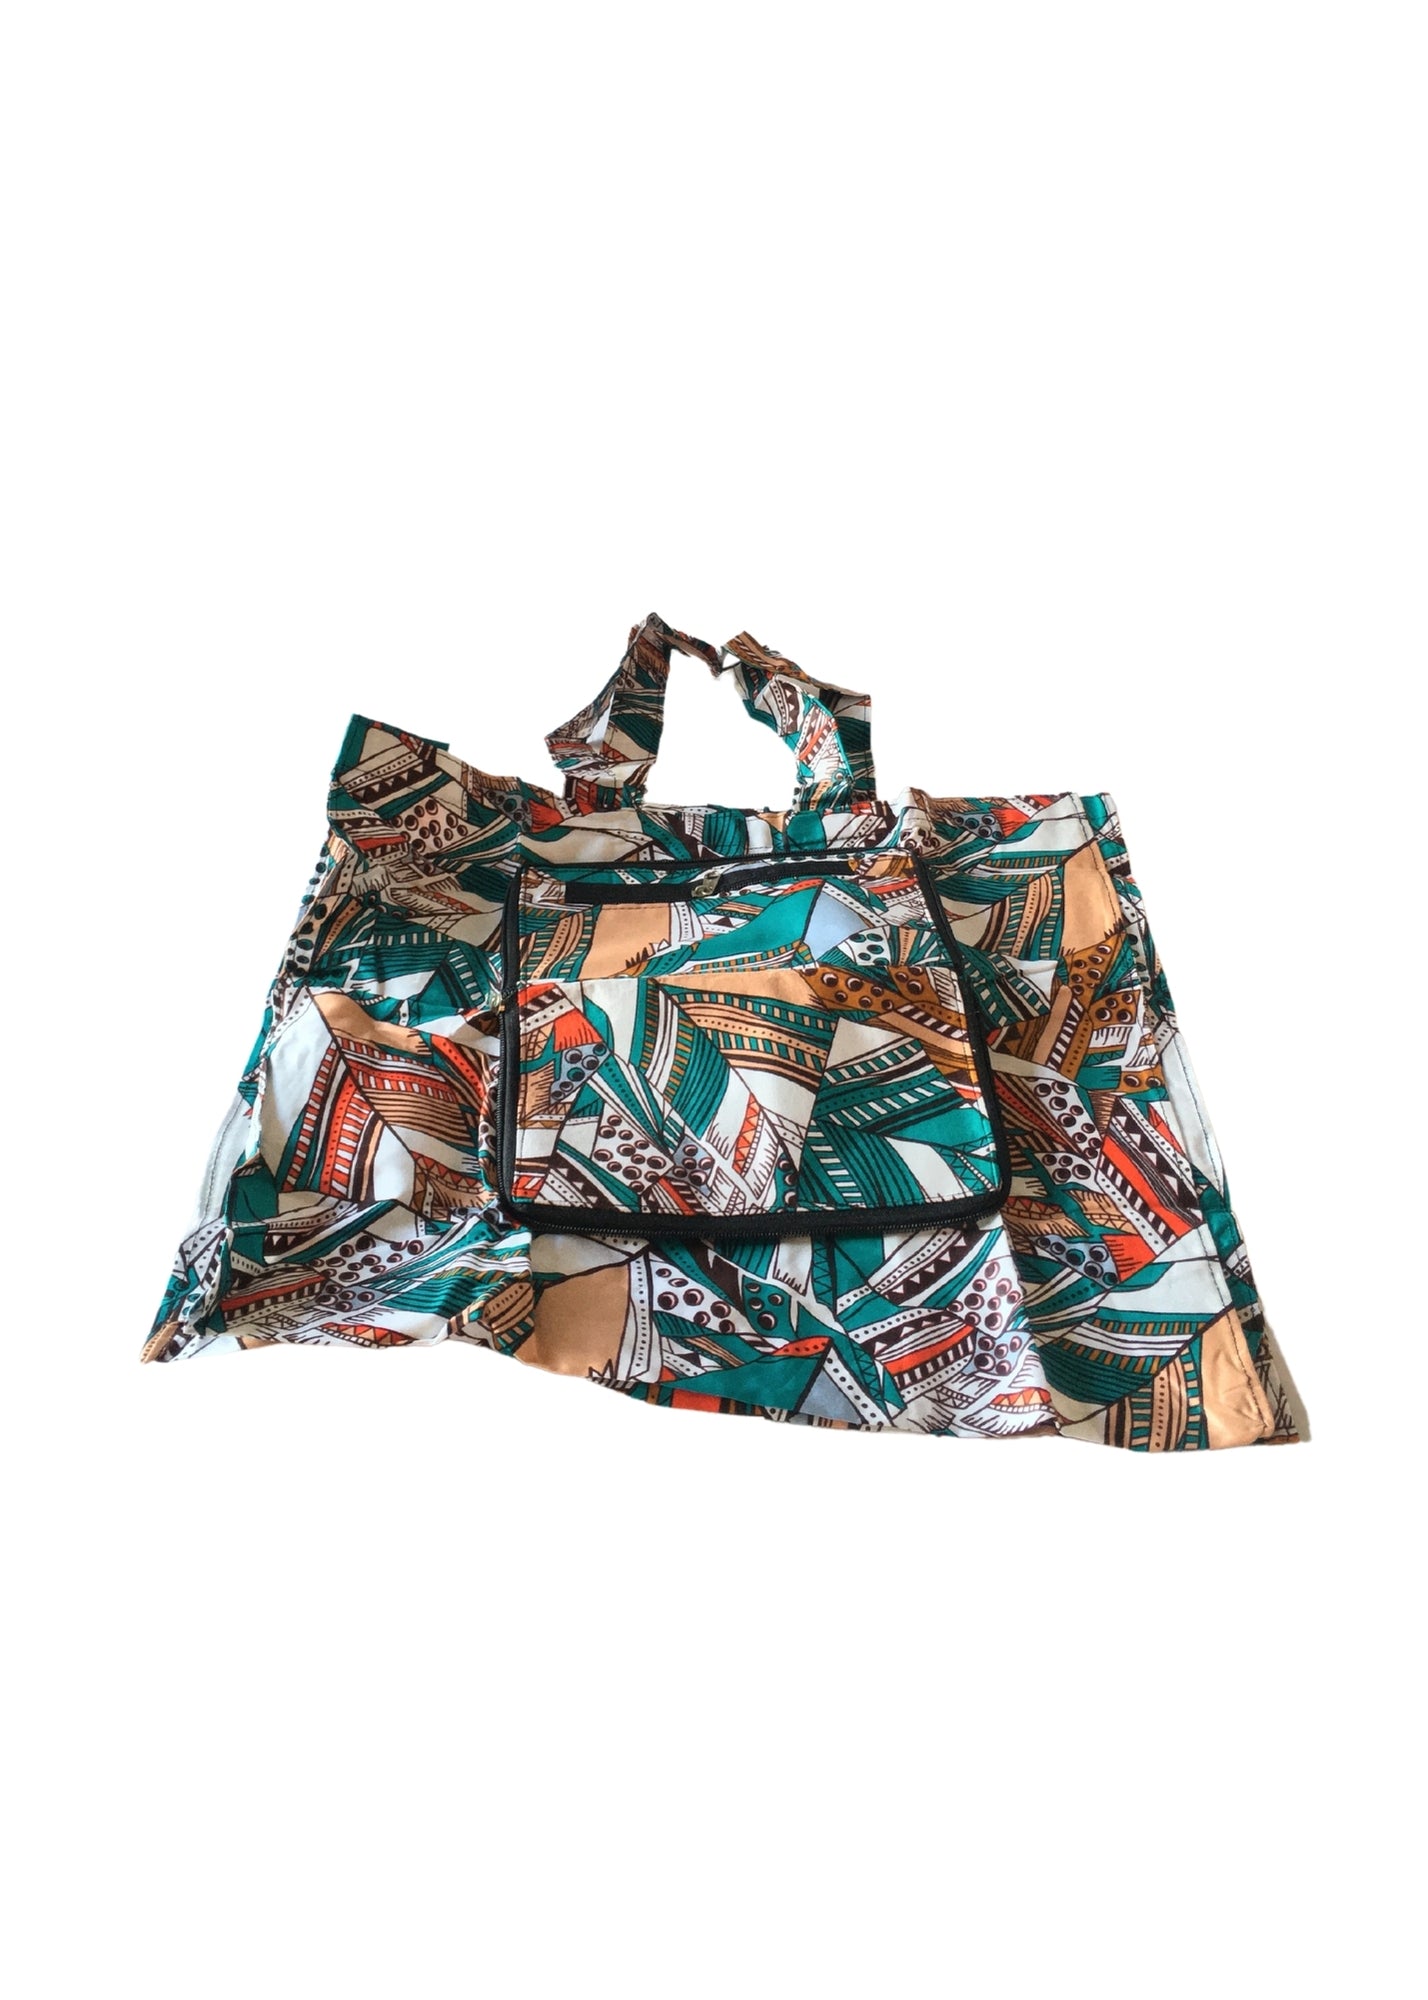 Foldable Tote Bag Green -Contemporary and Colorful Ensemble-African apparel and accessories